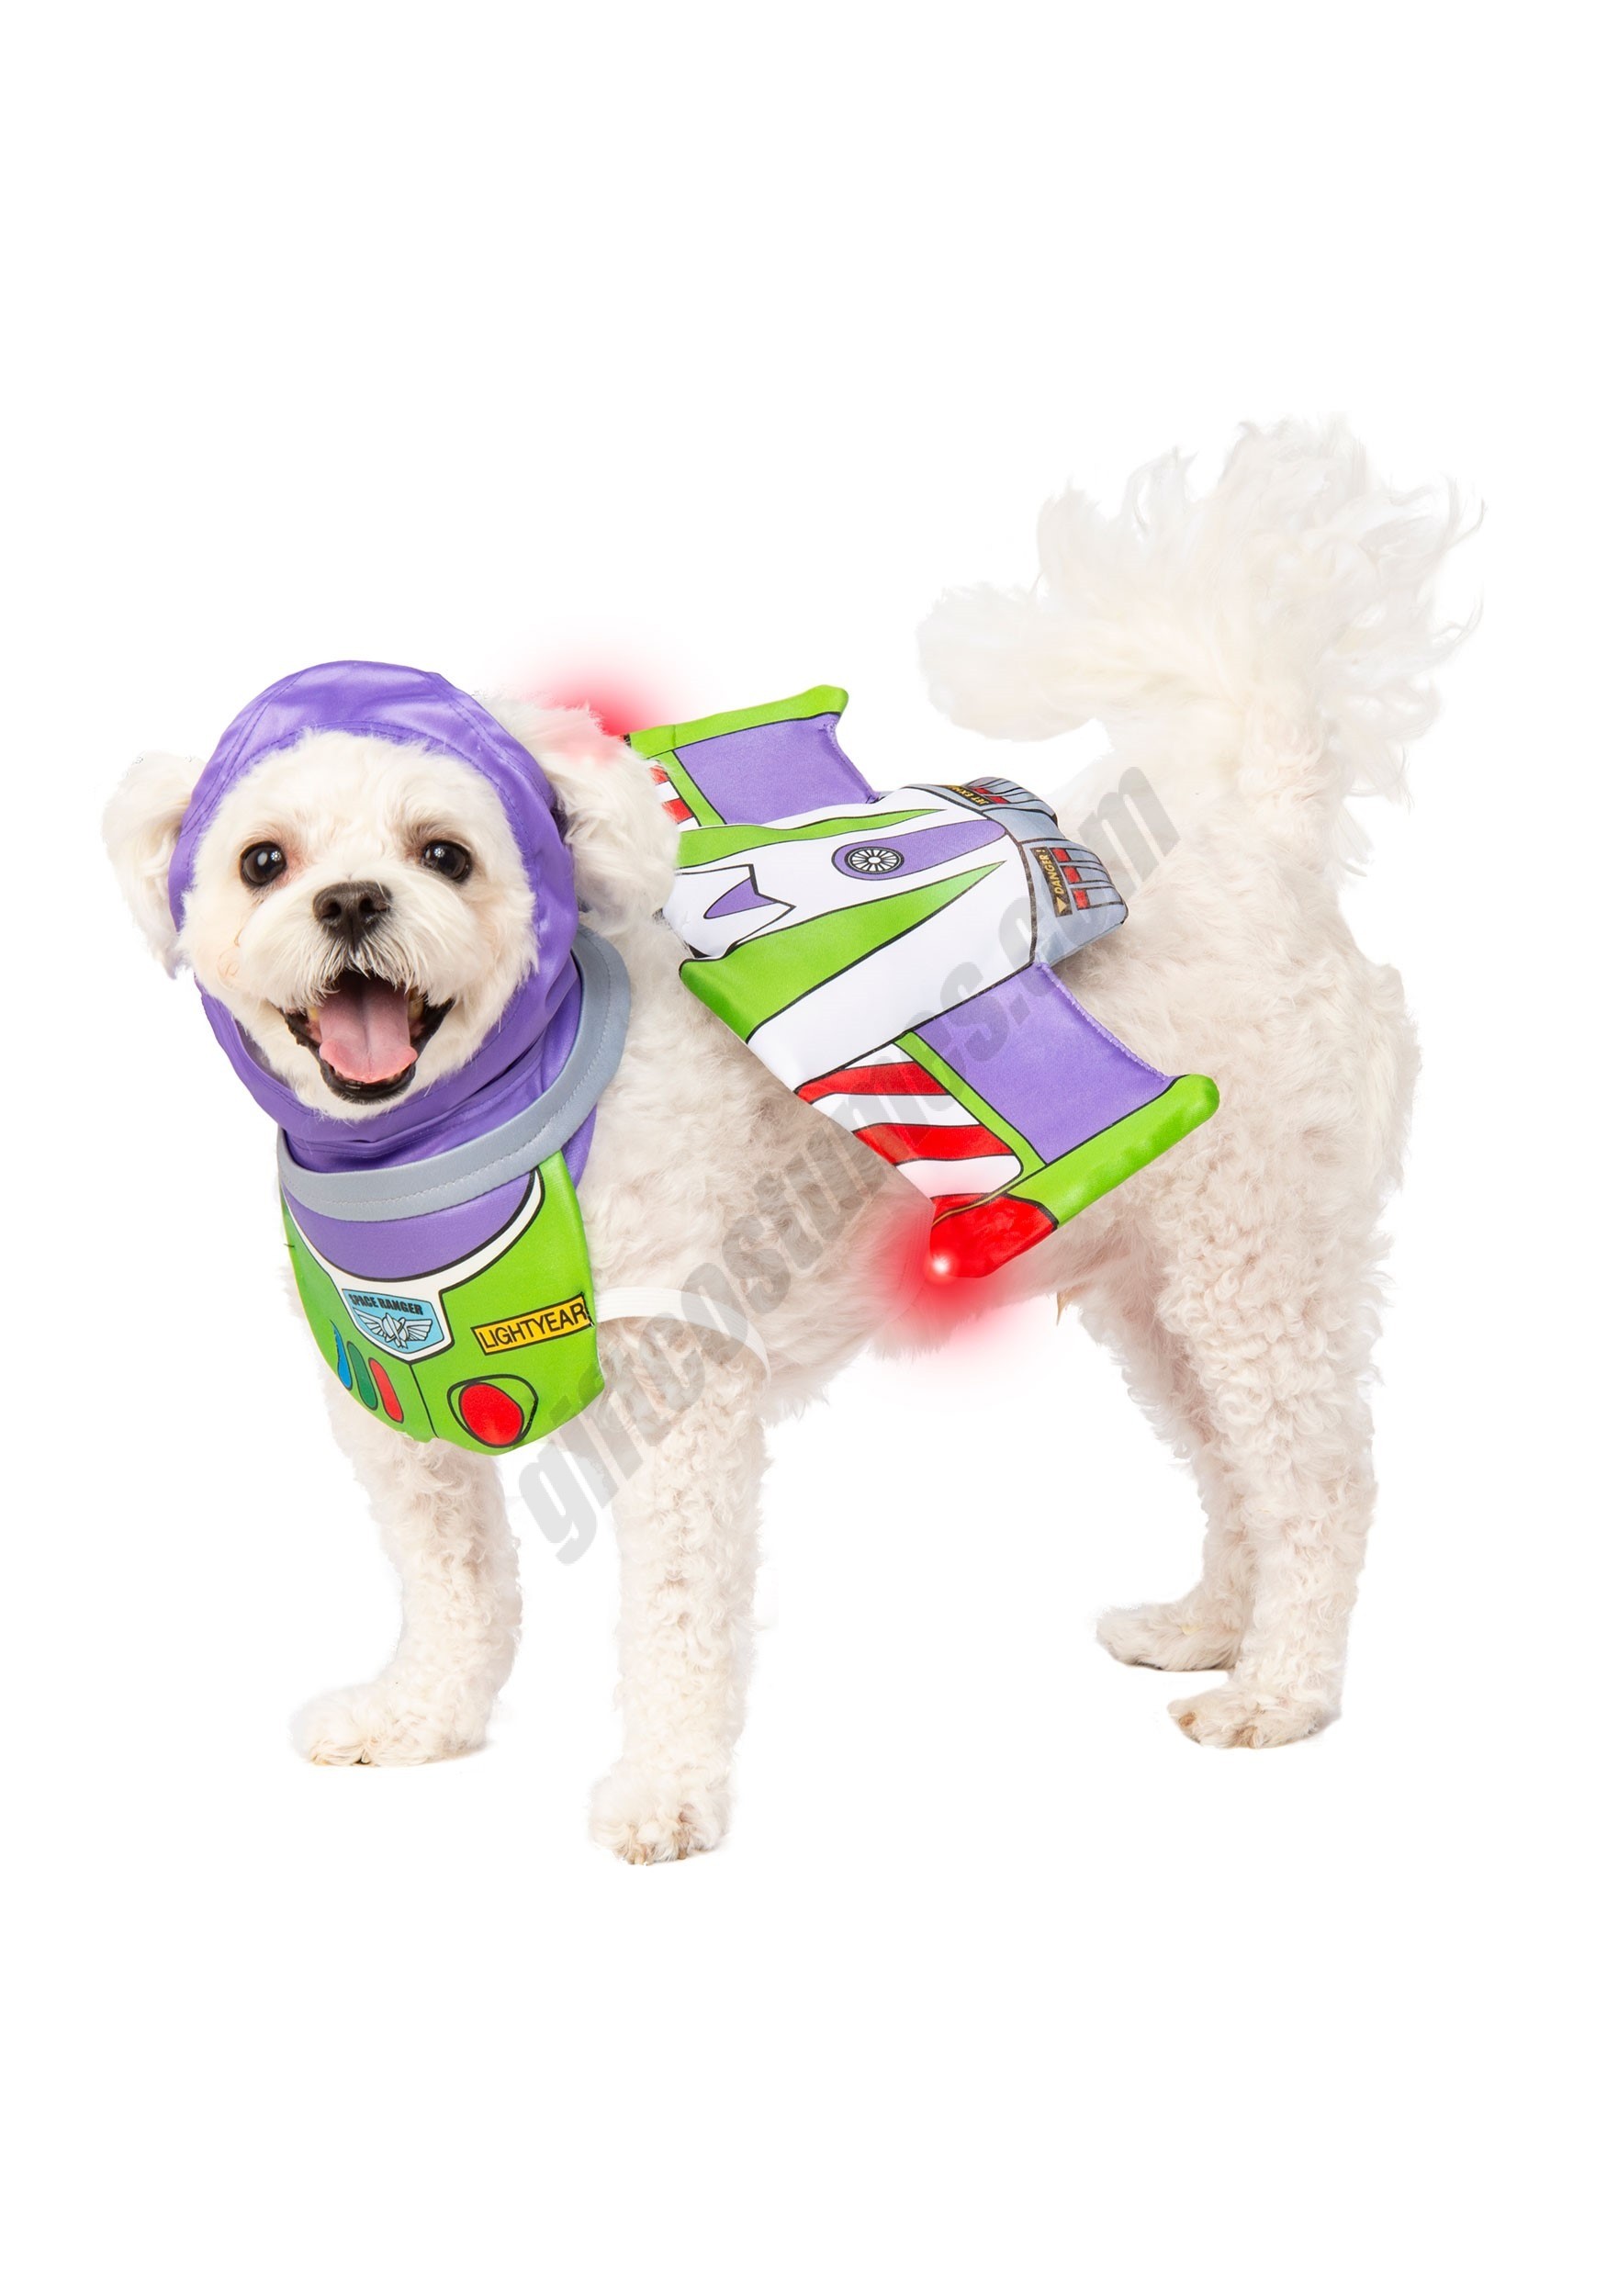 Toy Story Buzz Lightyear Costume for Dog Promotions - Toy Story Buzz Lightyear Costume for Dog Promotions